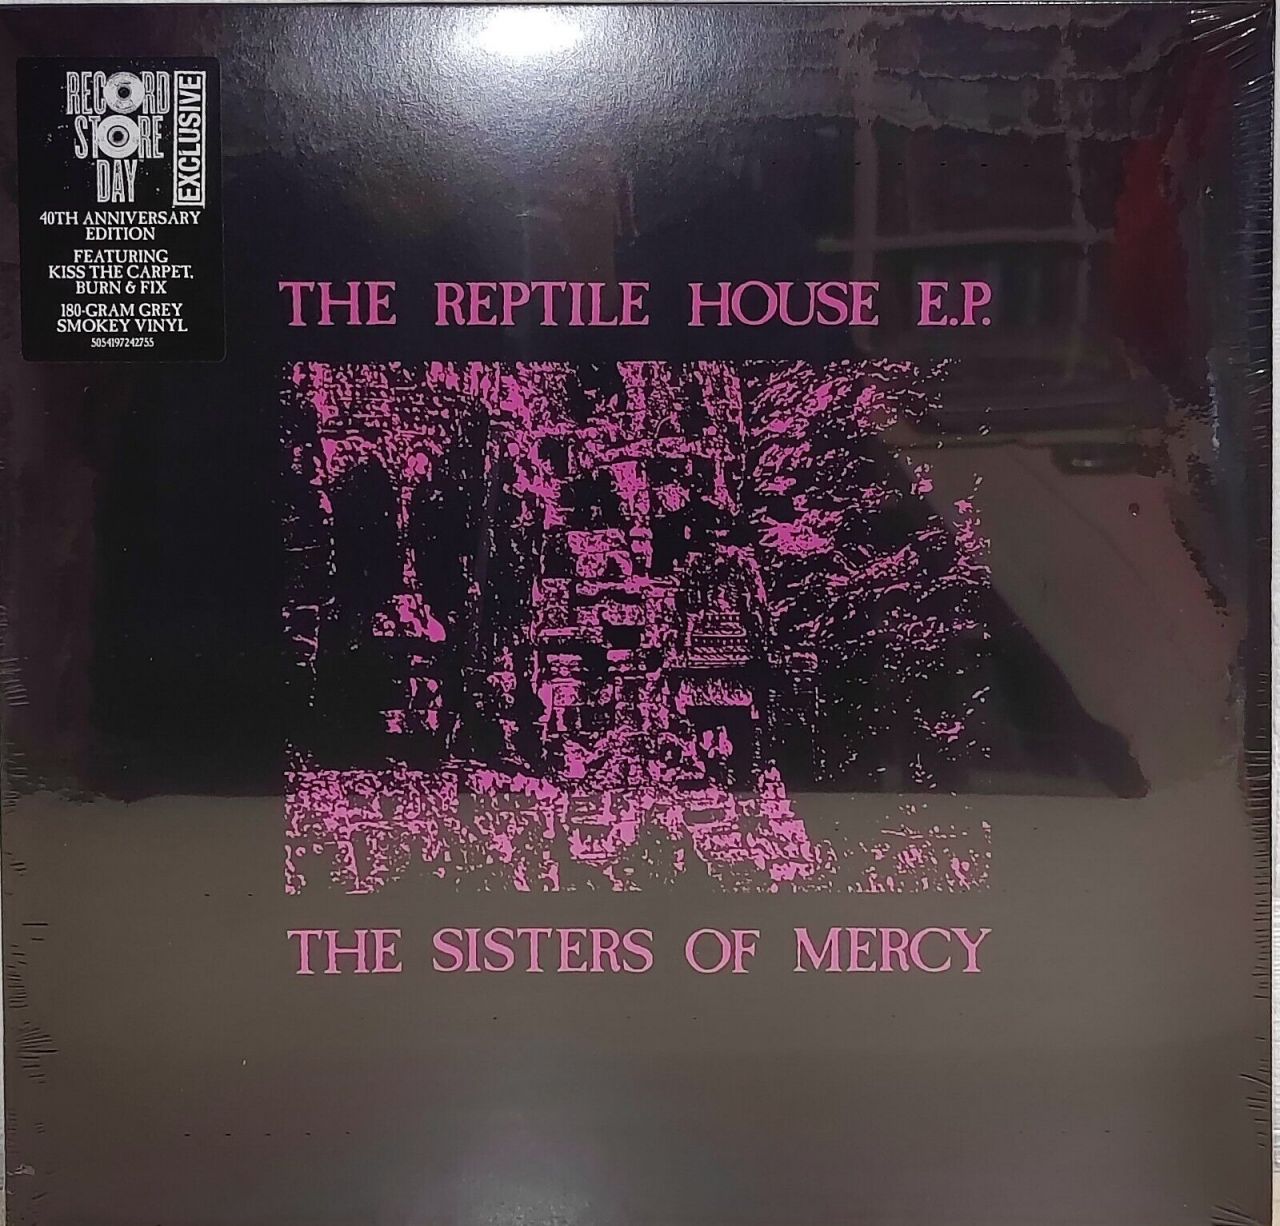 The Sisters Of Mercy - The Reptile House E.P. - 12" EP